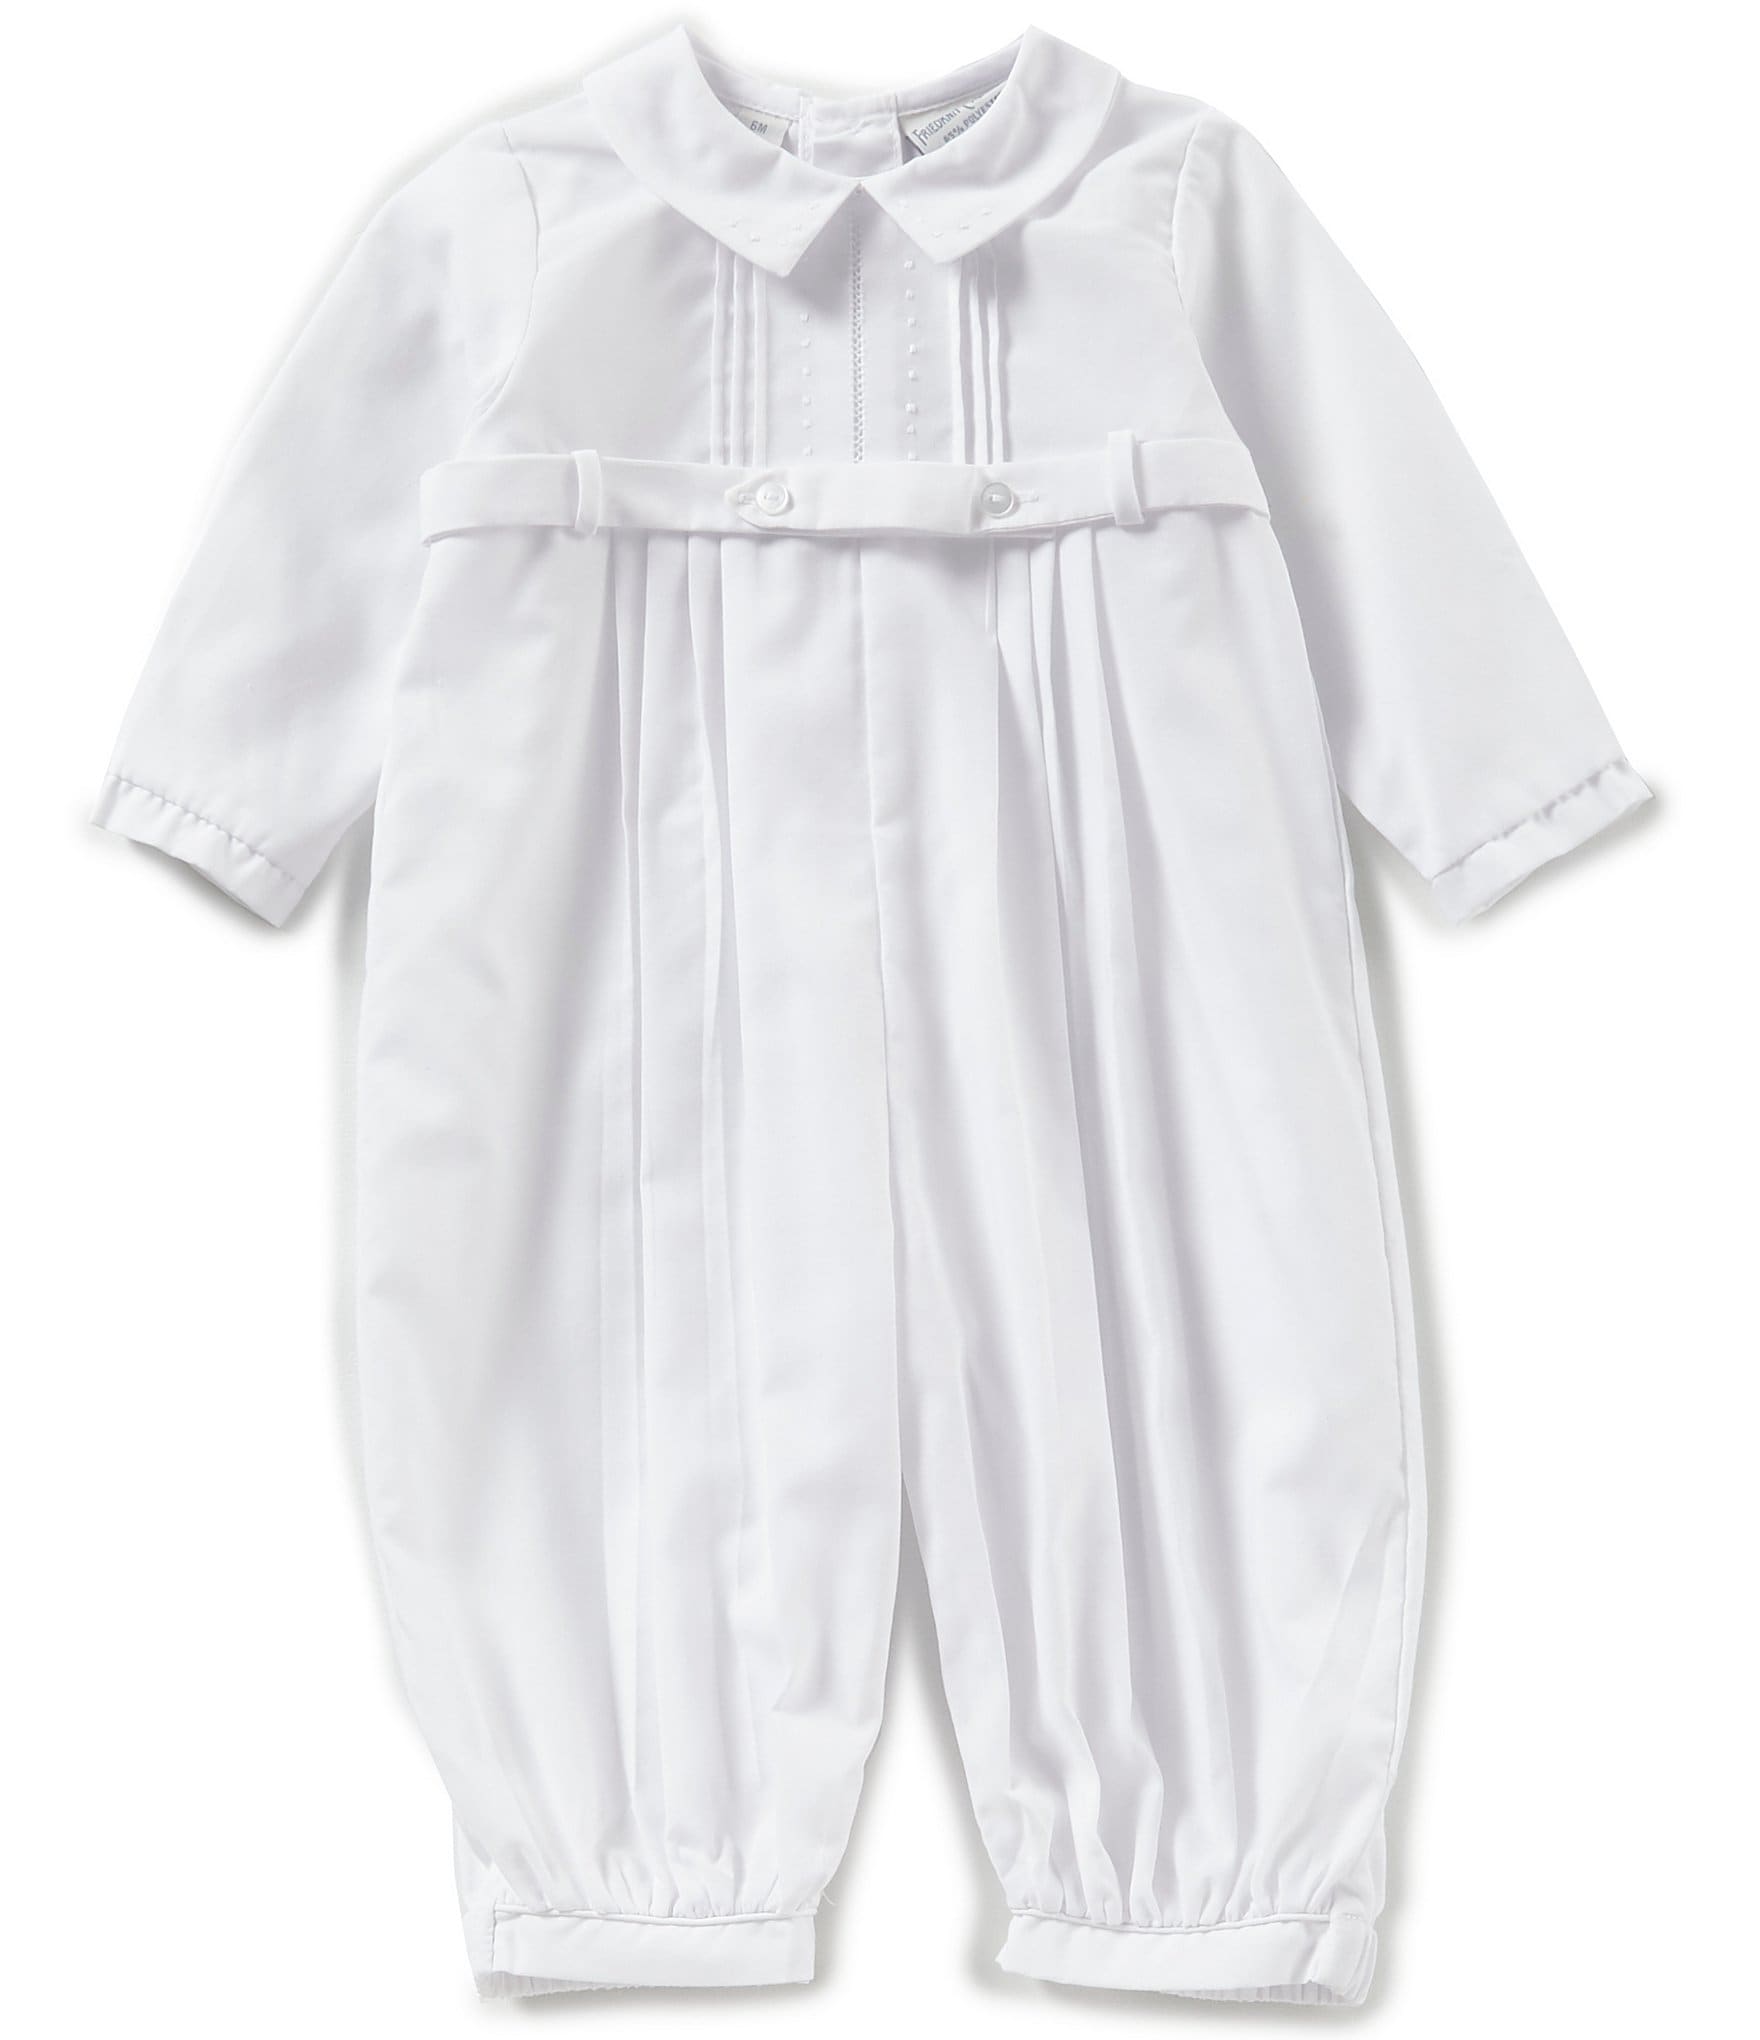 silver 0M-30M New Baby Boy Toddler Christening Baptism Outfit Size  0 1 2 3 4 